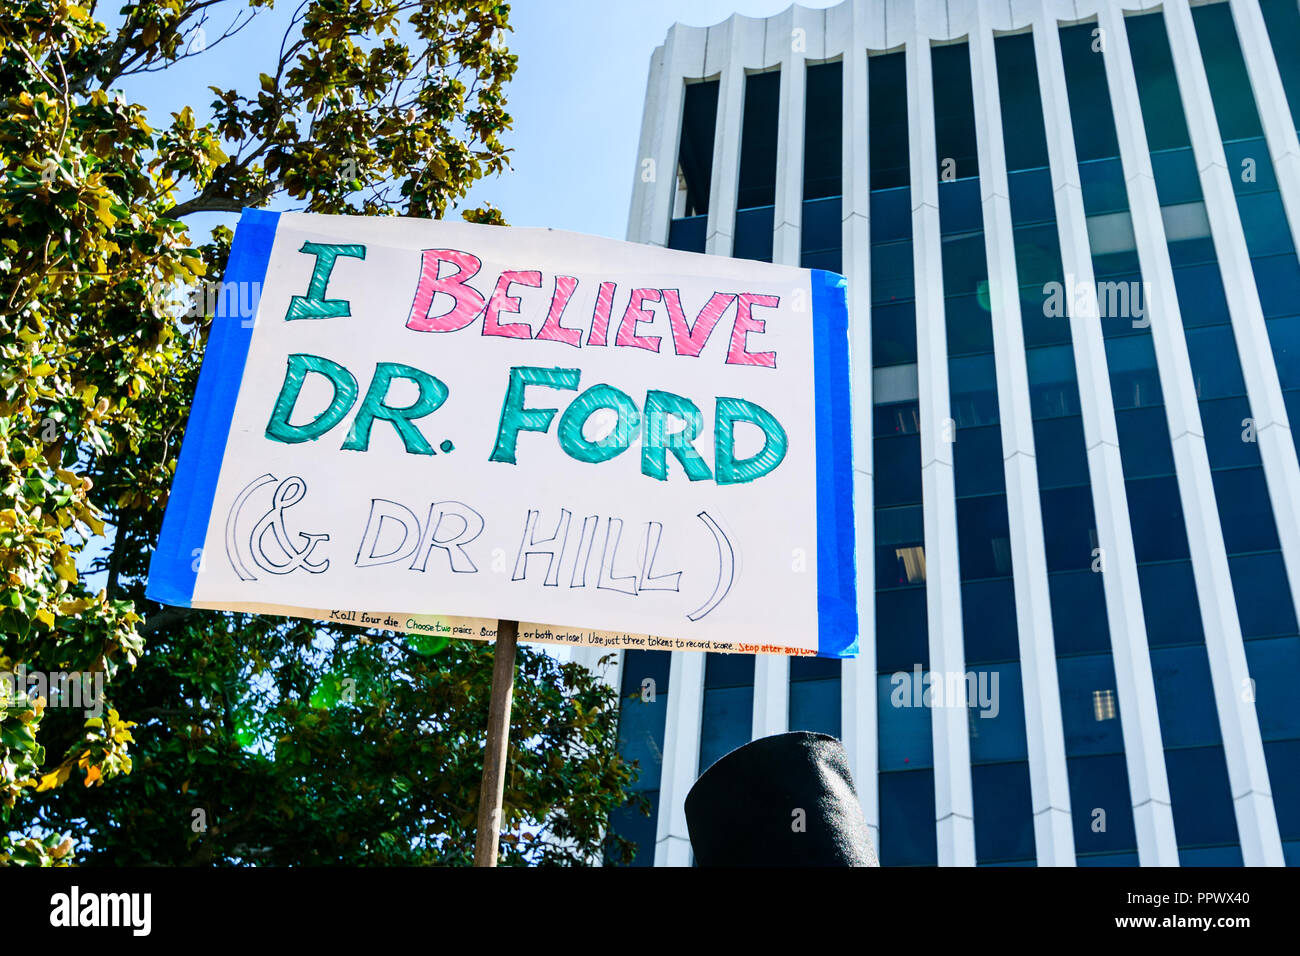 September 27, 2018 Palo Alto / CA / USA - Rally in support of Christine Blasey Ford in front of the Palo Alto City Hall; 'I believe Dr Ford & Dr Hill' Stock Photo